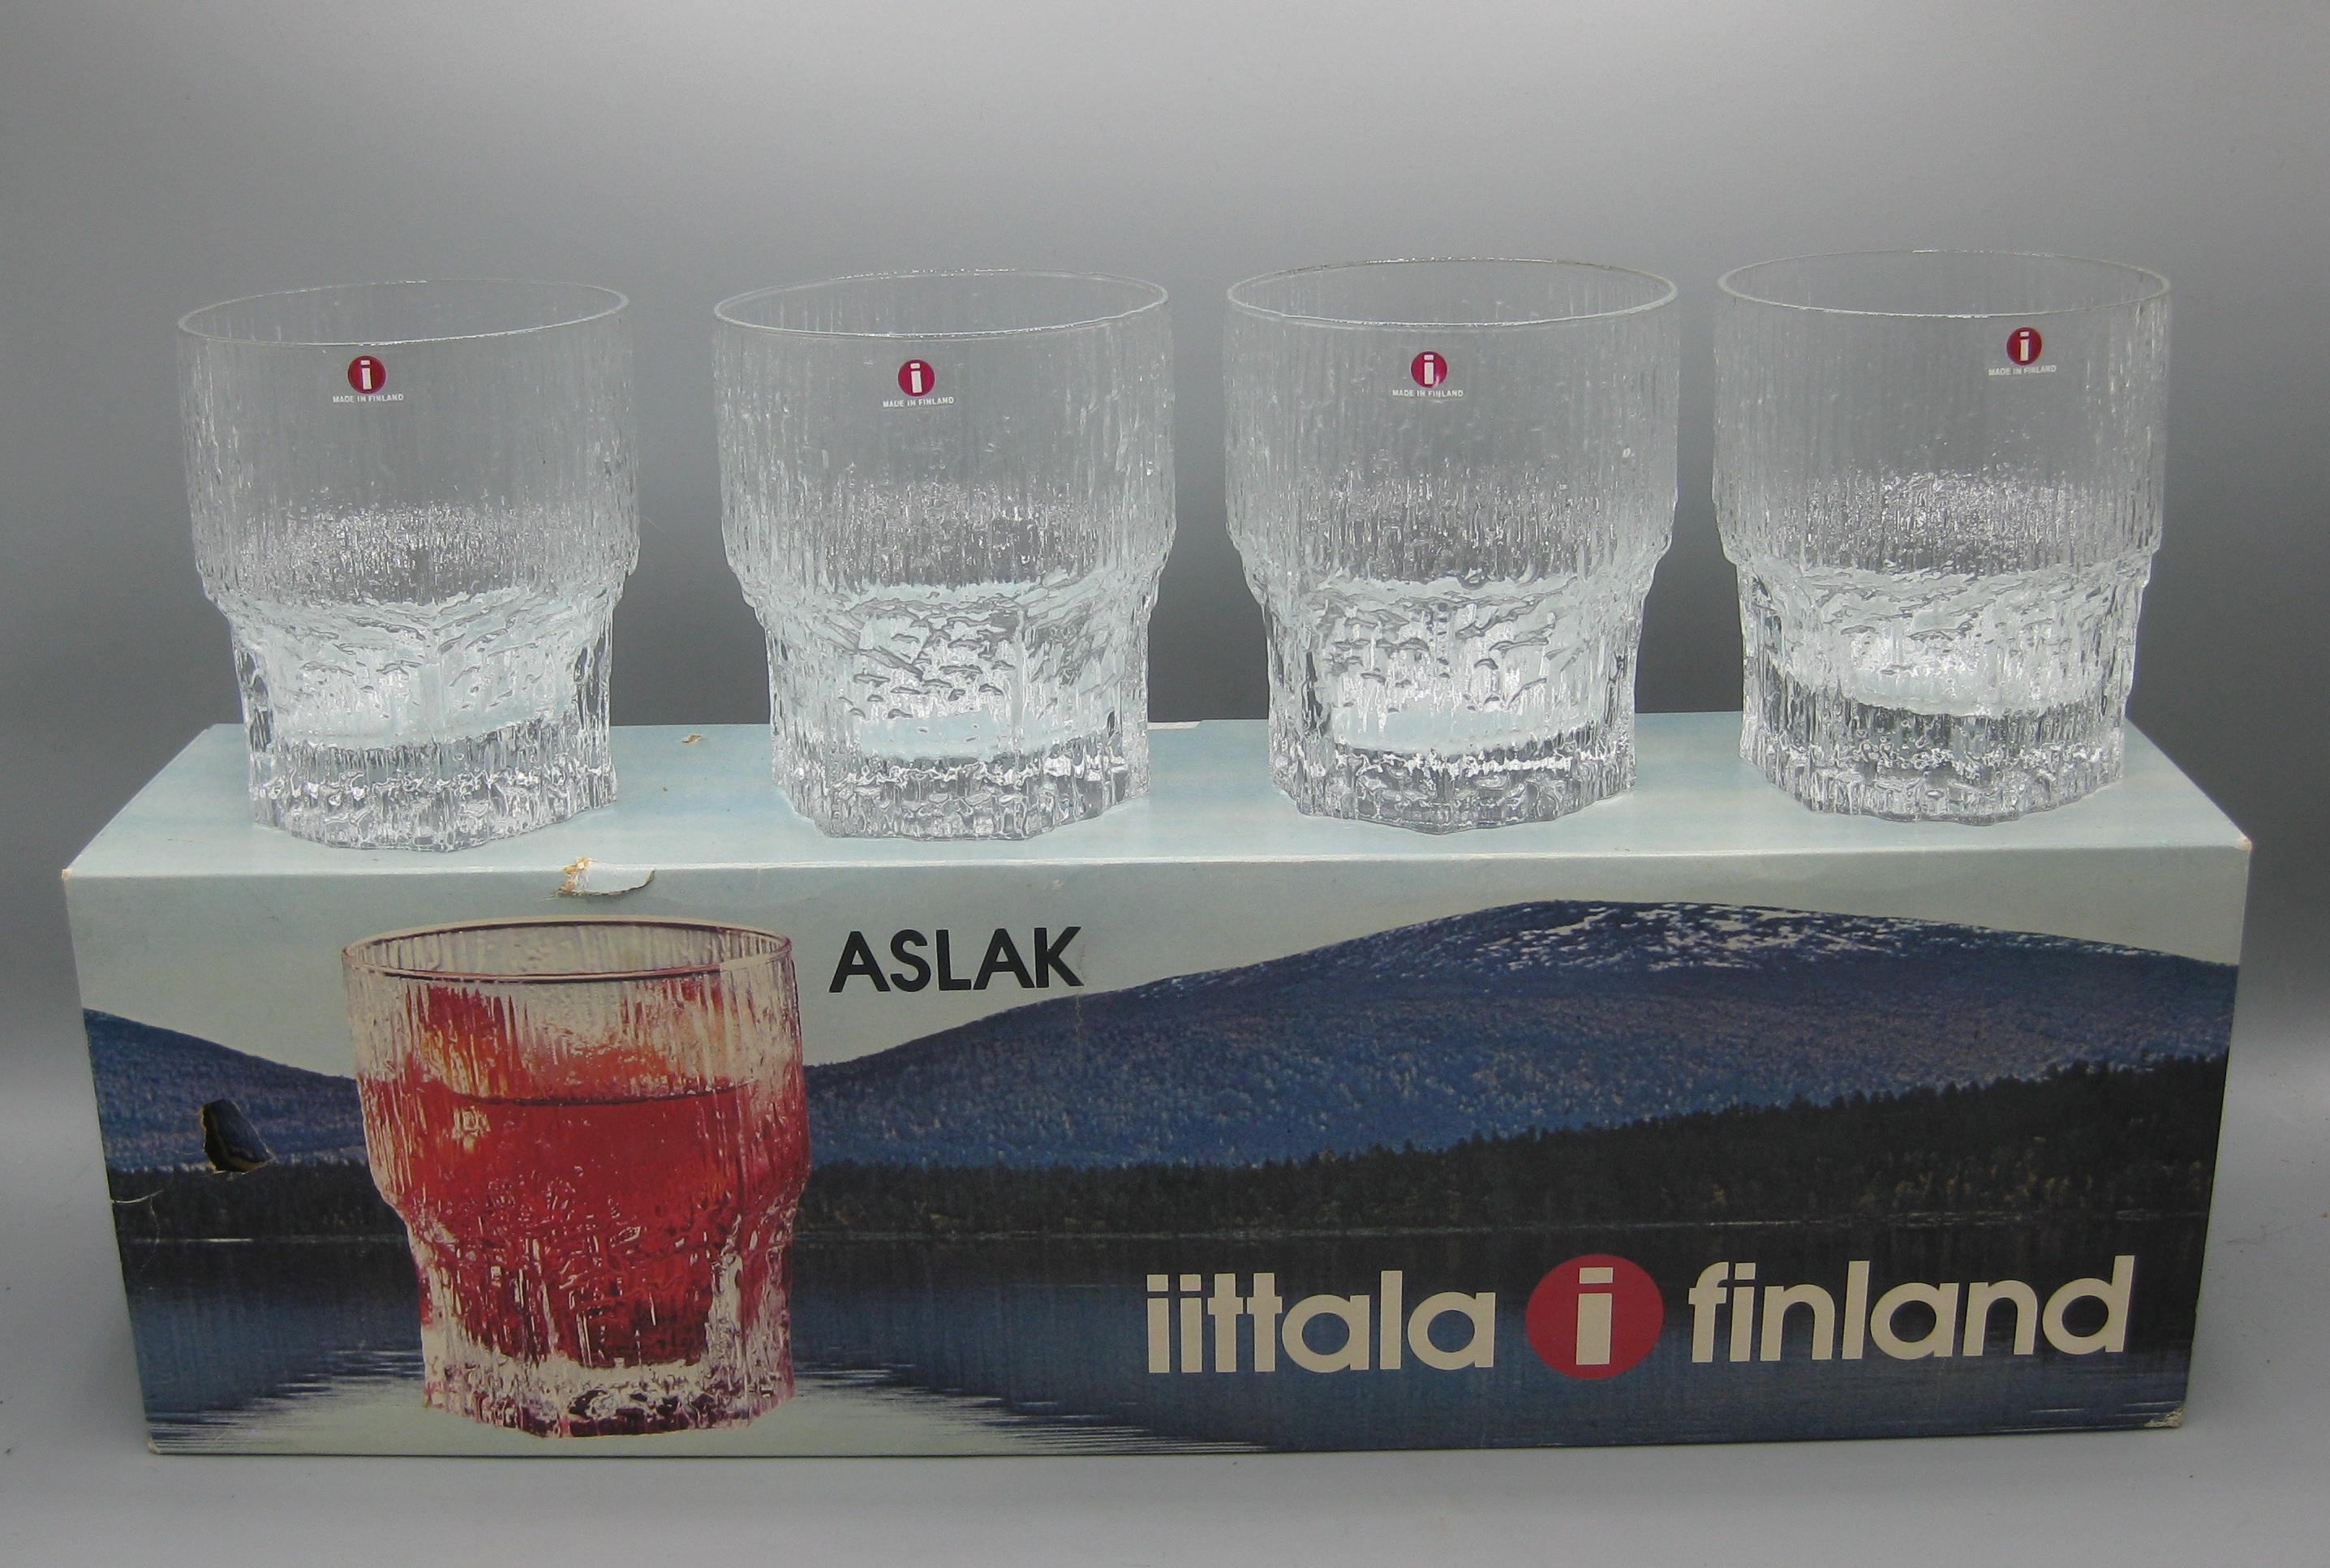 Rare set of 4 original iittala of Finland Aslak 12 ounce old fashion tumbler glasses. and date from the 1960's. These are new old stock and have never been used. They come in the original box and still has the original stickers on each glass.